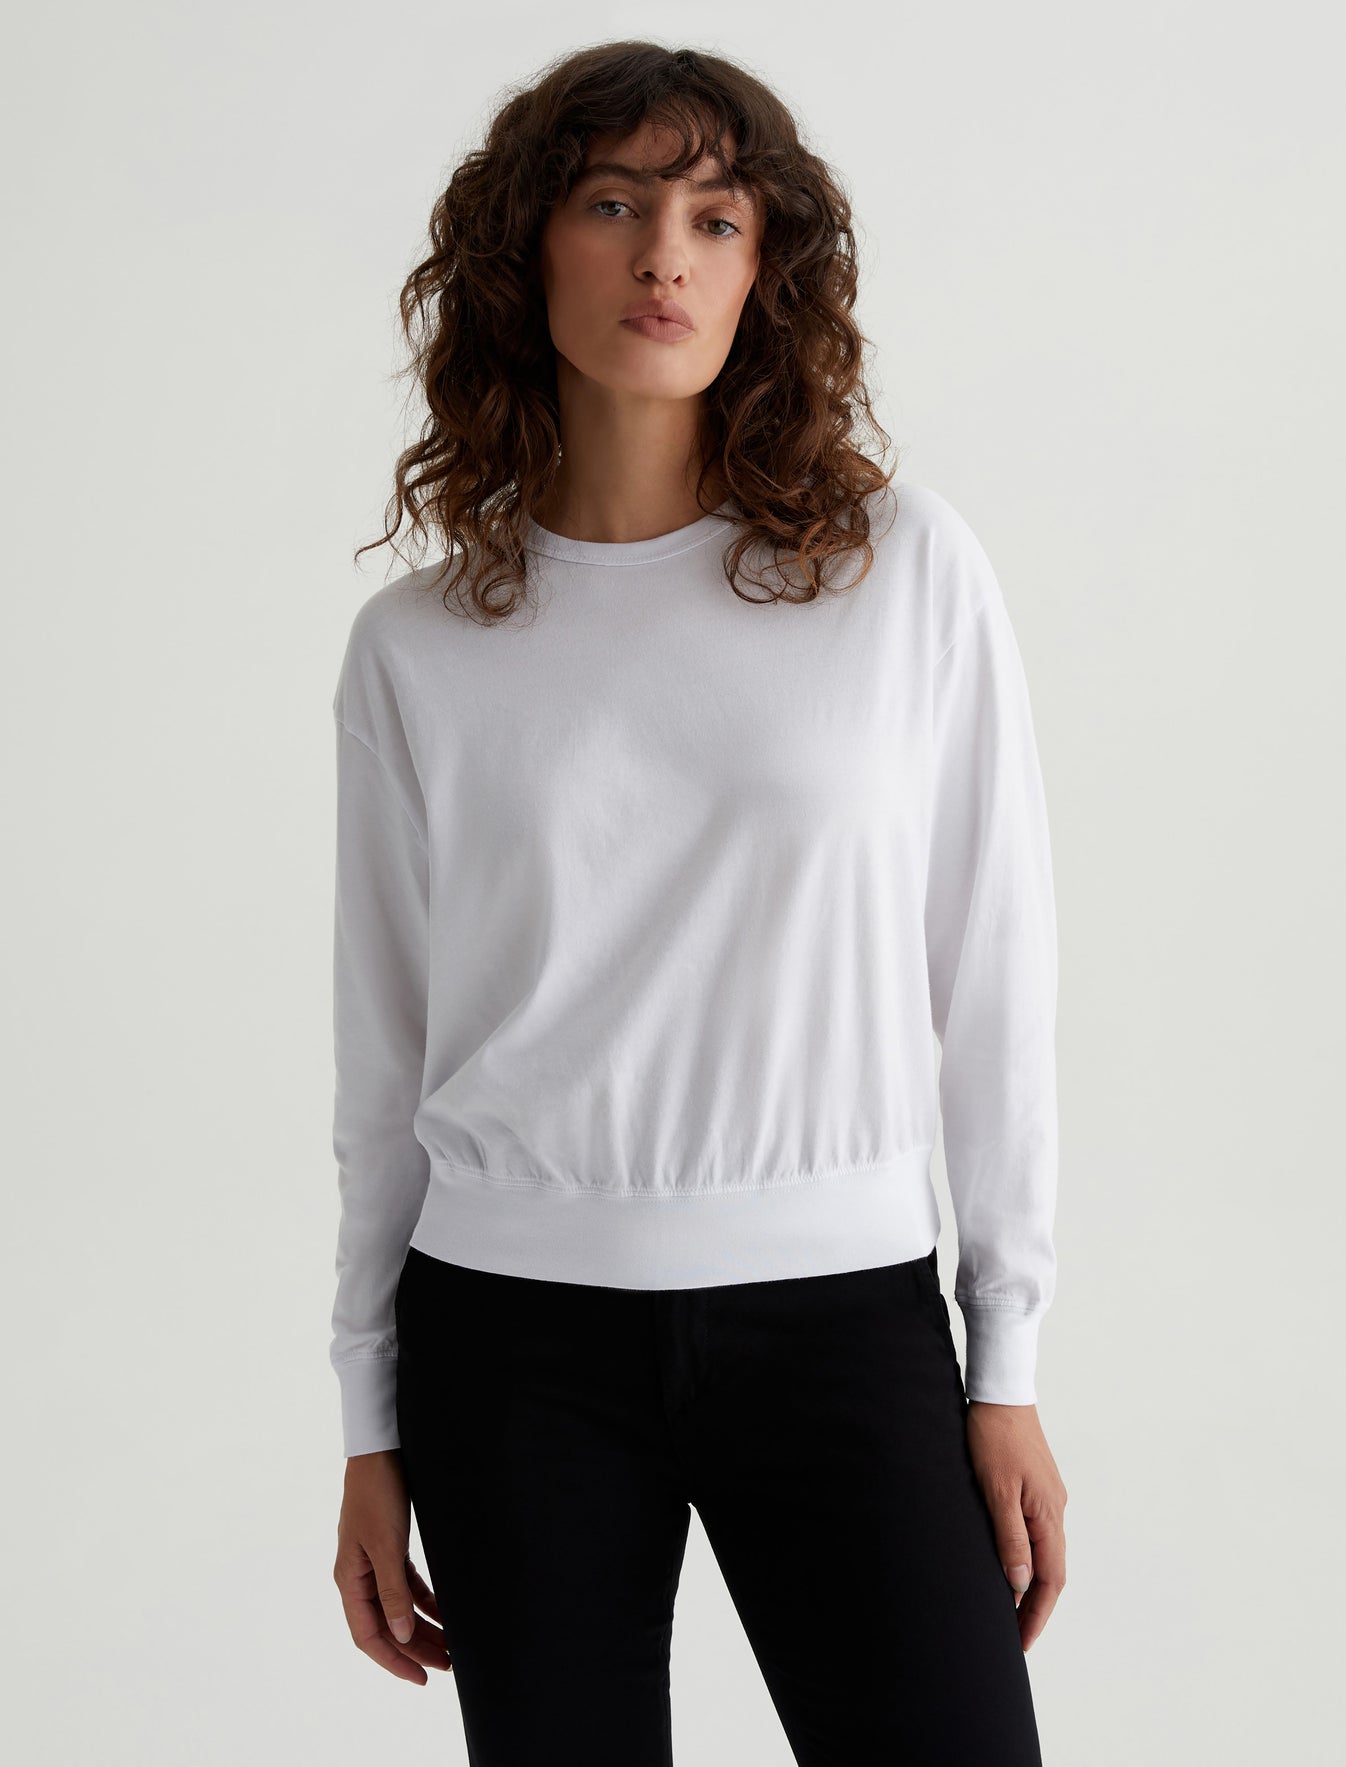 Karter Pullover True White Oversized Fit Long Sleeve Crew Neck Pullover Womens Top Photo 1